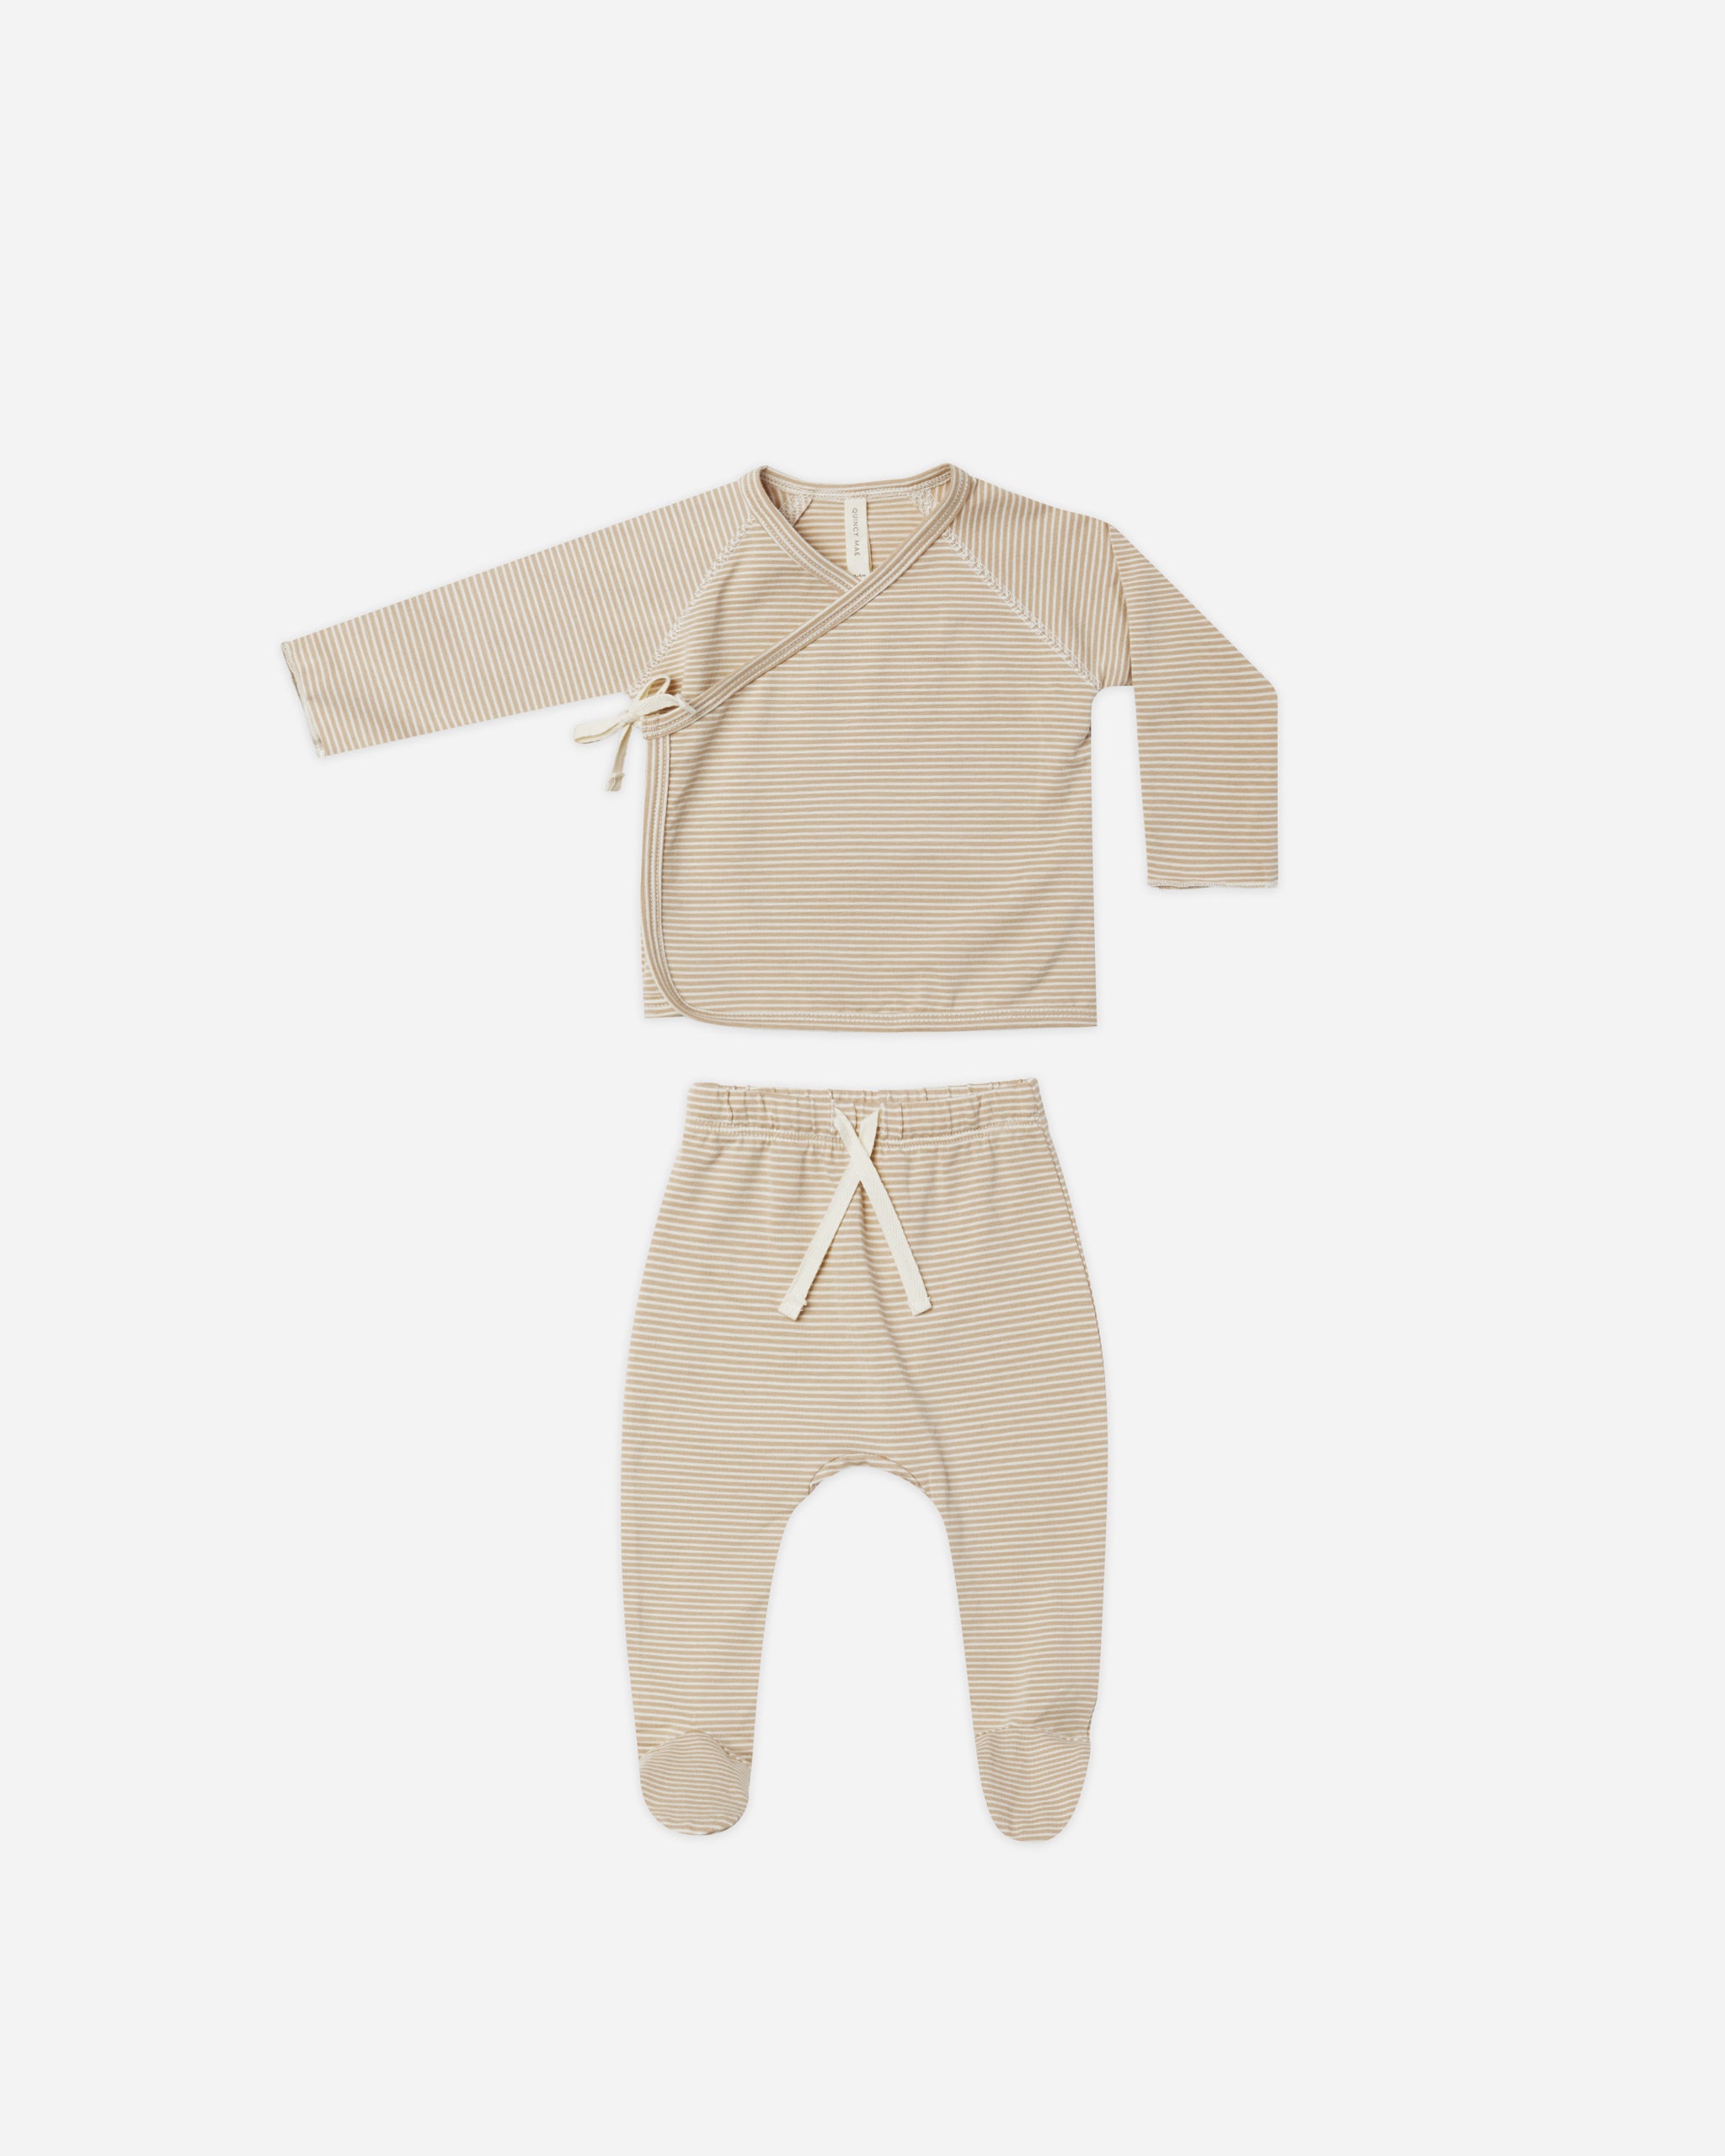 Wrap Top + Footed Pant Set || Latte Micro Stripe - Rylee + Cru | Kids Clothes | Trendy Baby Clothes | Modern Infant Outfits |